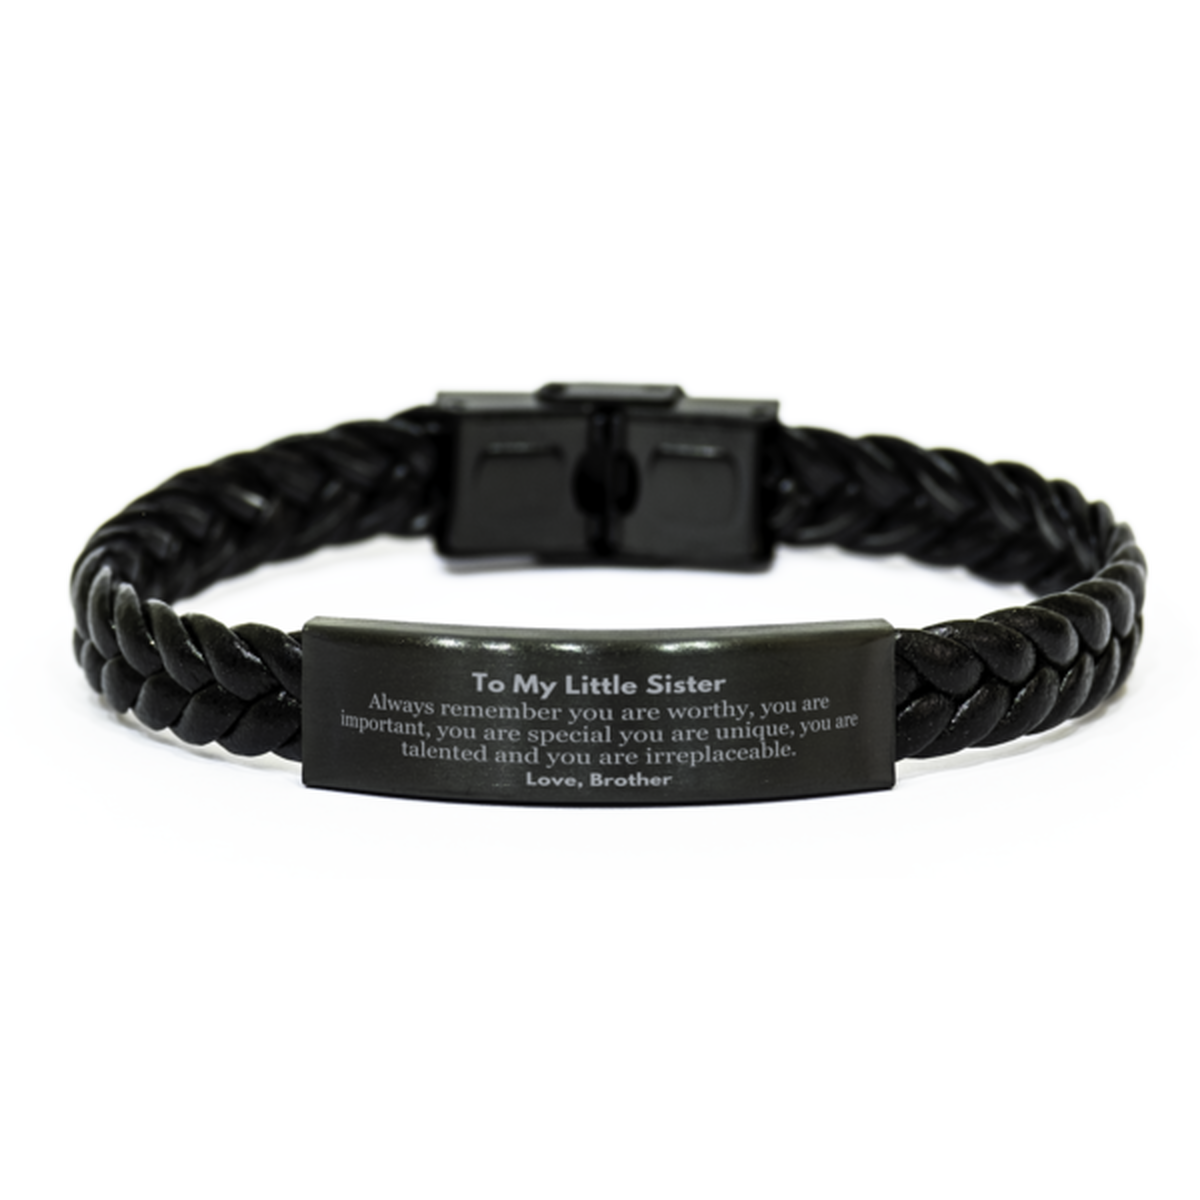 Little Sister Birthday Gifts from Brother, Inspirational Braided Leather Bracelet for Little Sister Christmas Graduation Gifts for Little Sister Always remember you are worthy, you are important. Love, Brother